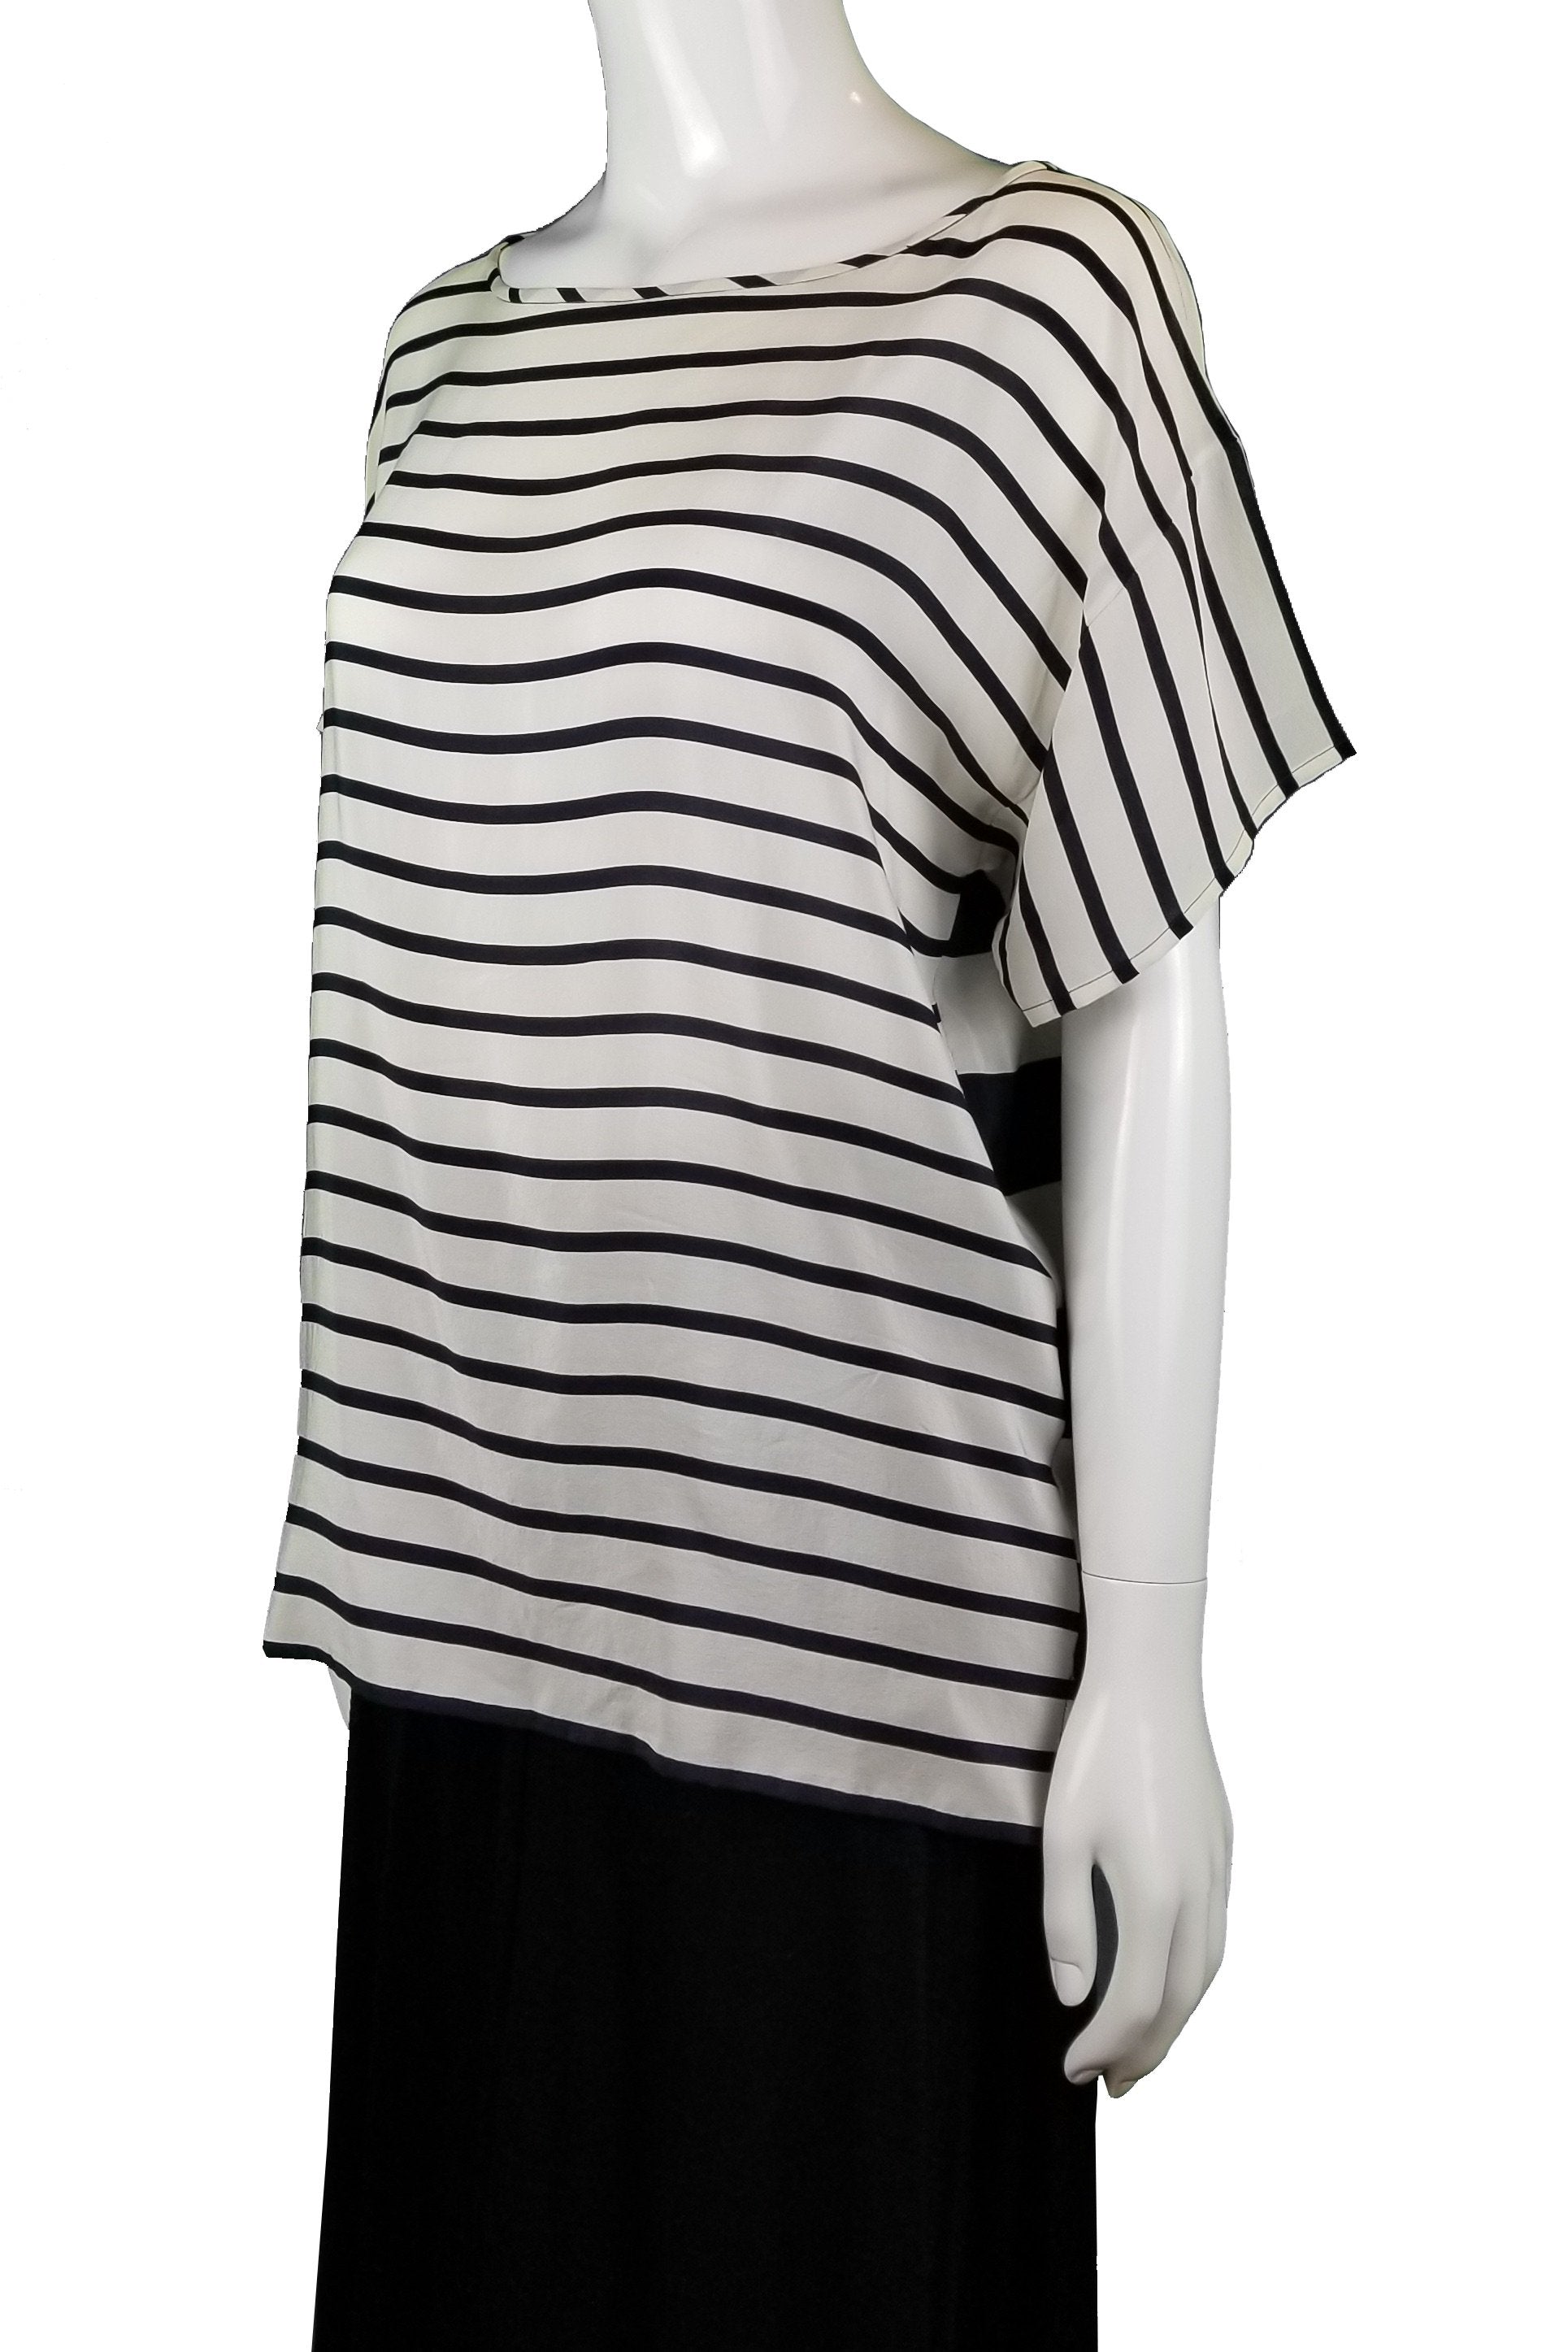 Club Monaco B/W Stripped Shirt, Feeling a little unconventional? Get this cute stripped  shirt with front and back of different patterns., Black, White, 100% Silk, Women's black and white top, women's top, women's shirt, women's summer top